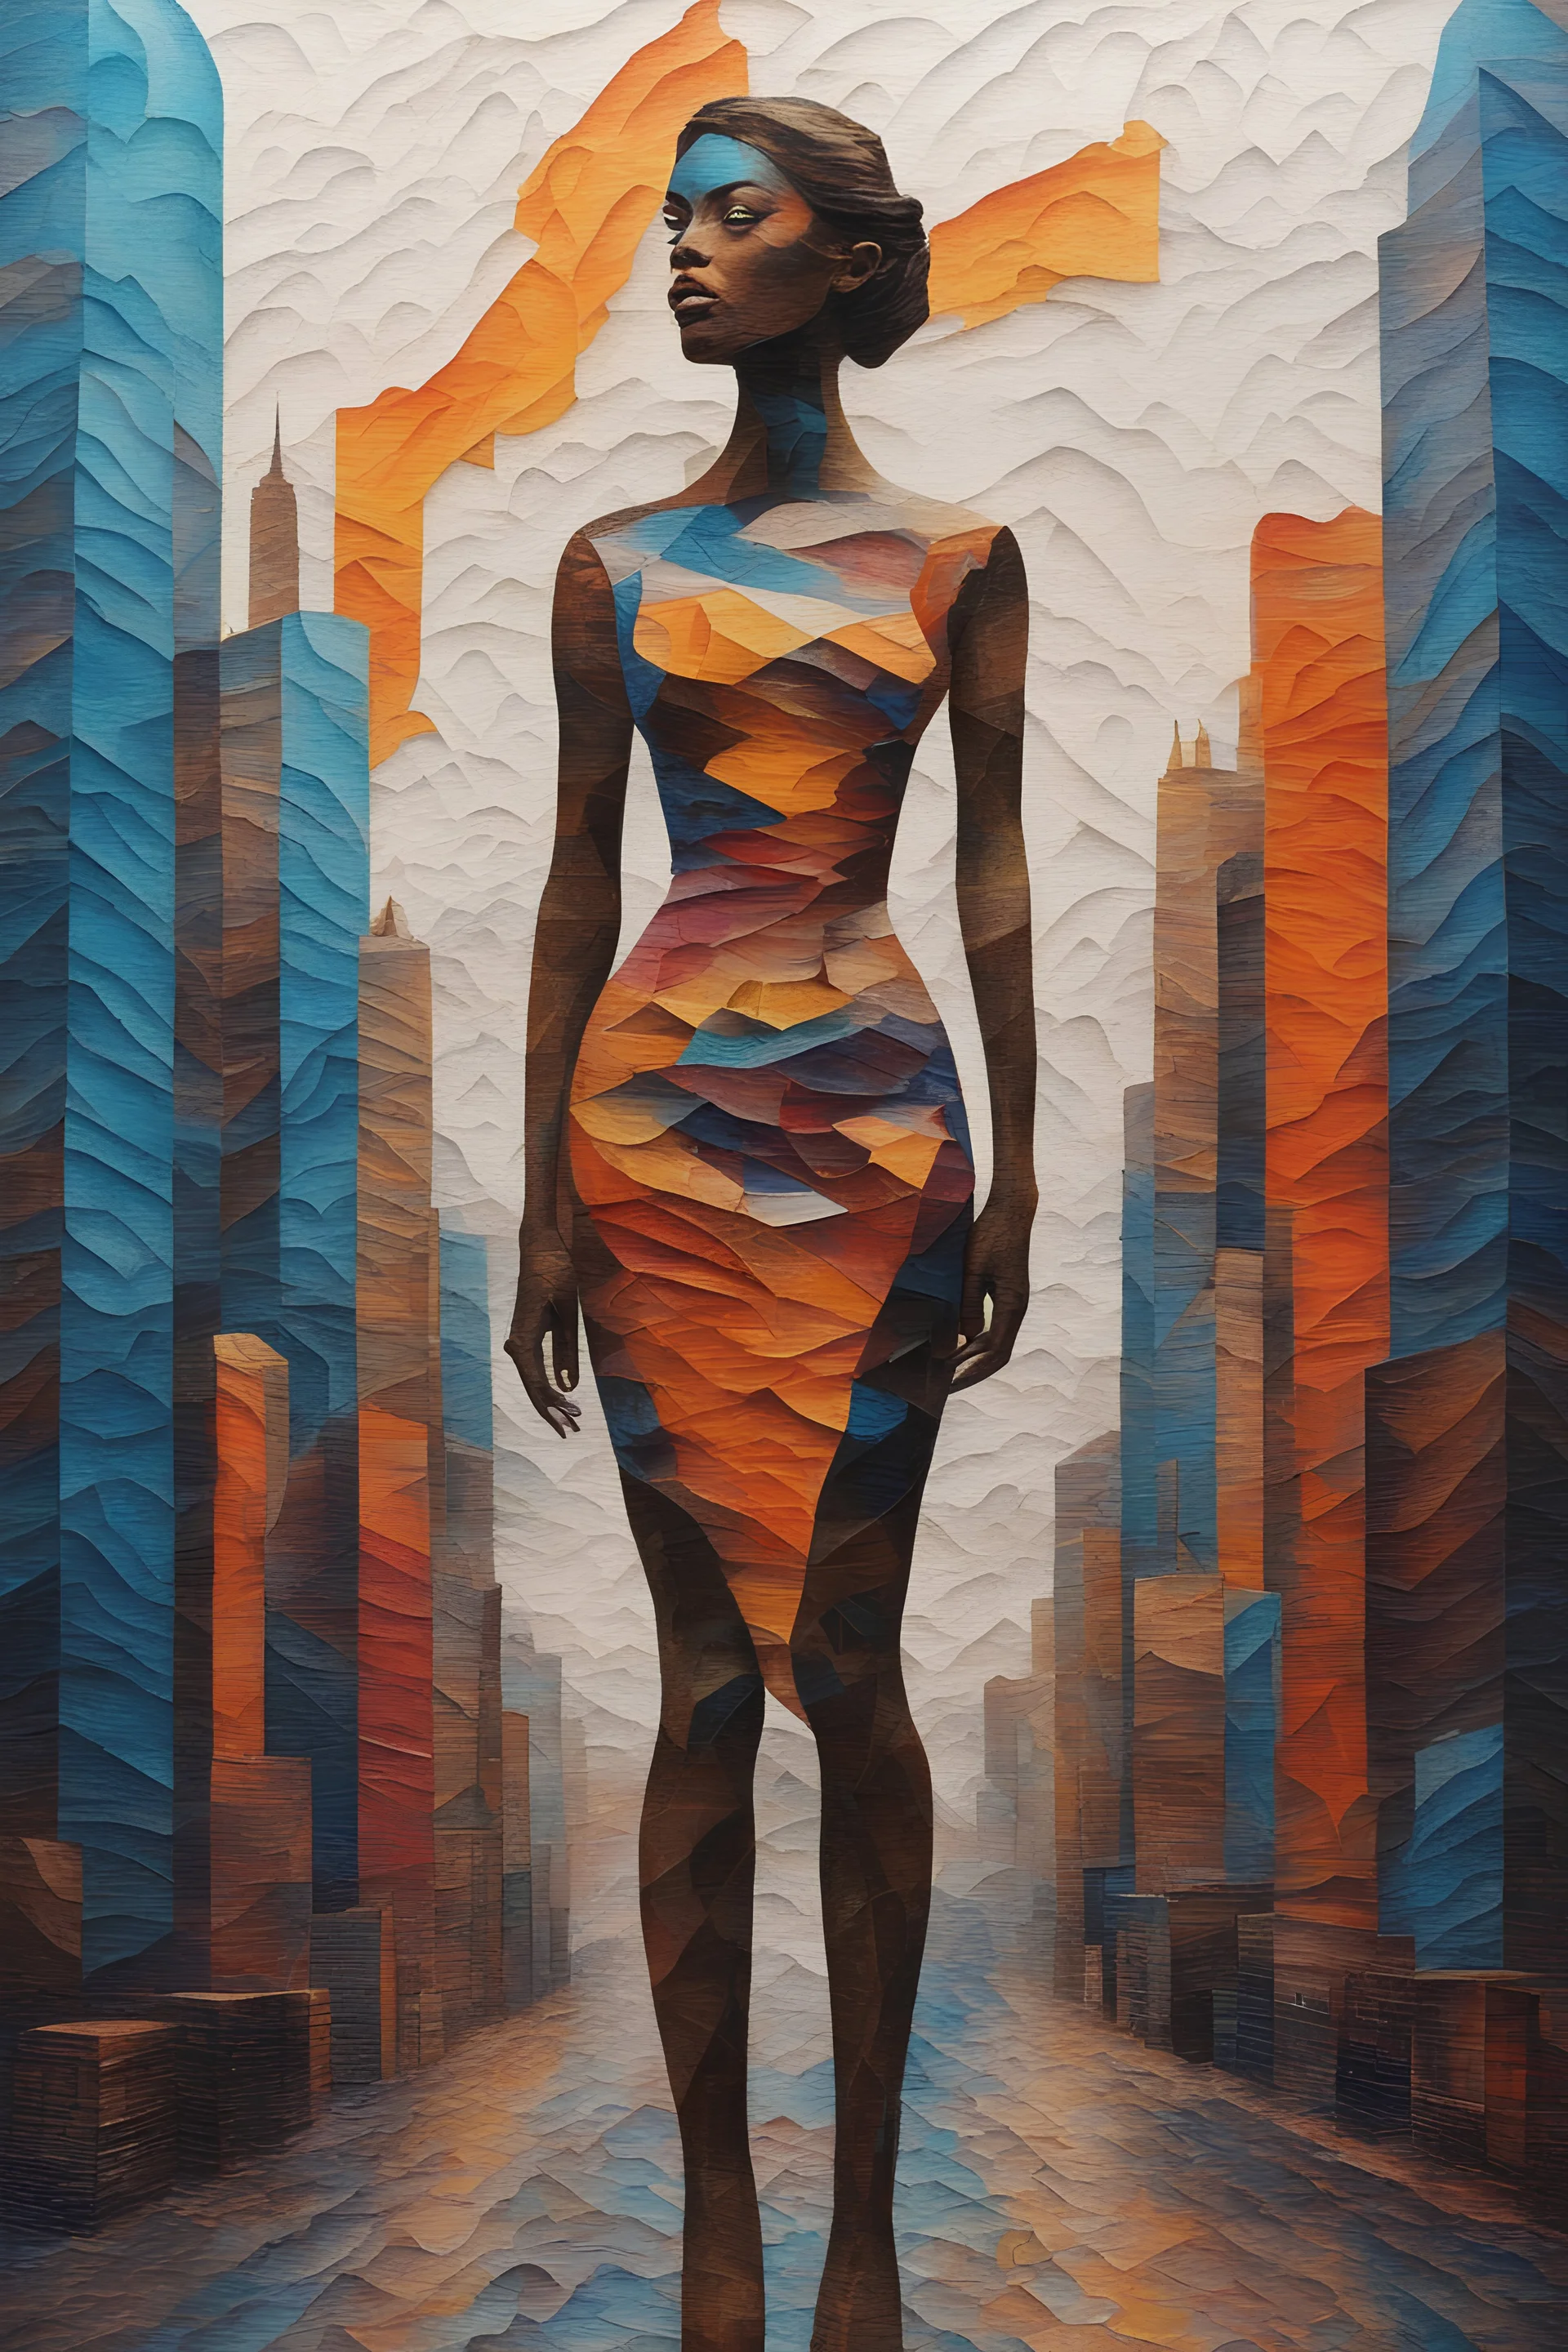 an impasto painting of a woman standing in front of a city, op art, retro 3 d graphics, bronze - skinned, geometric curves, featured art, ink leak, philosophical splashes of colors, art brought to life, facial symmetry